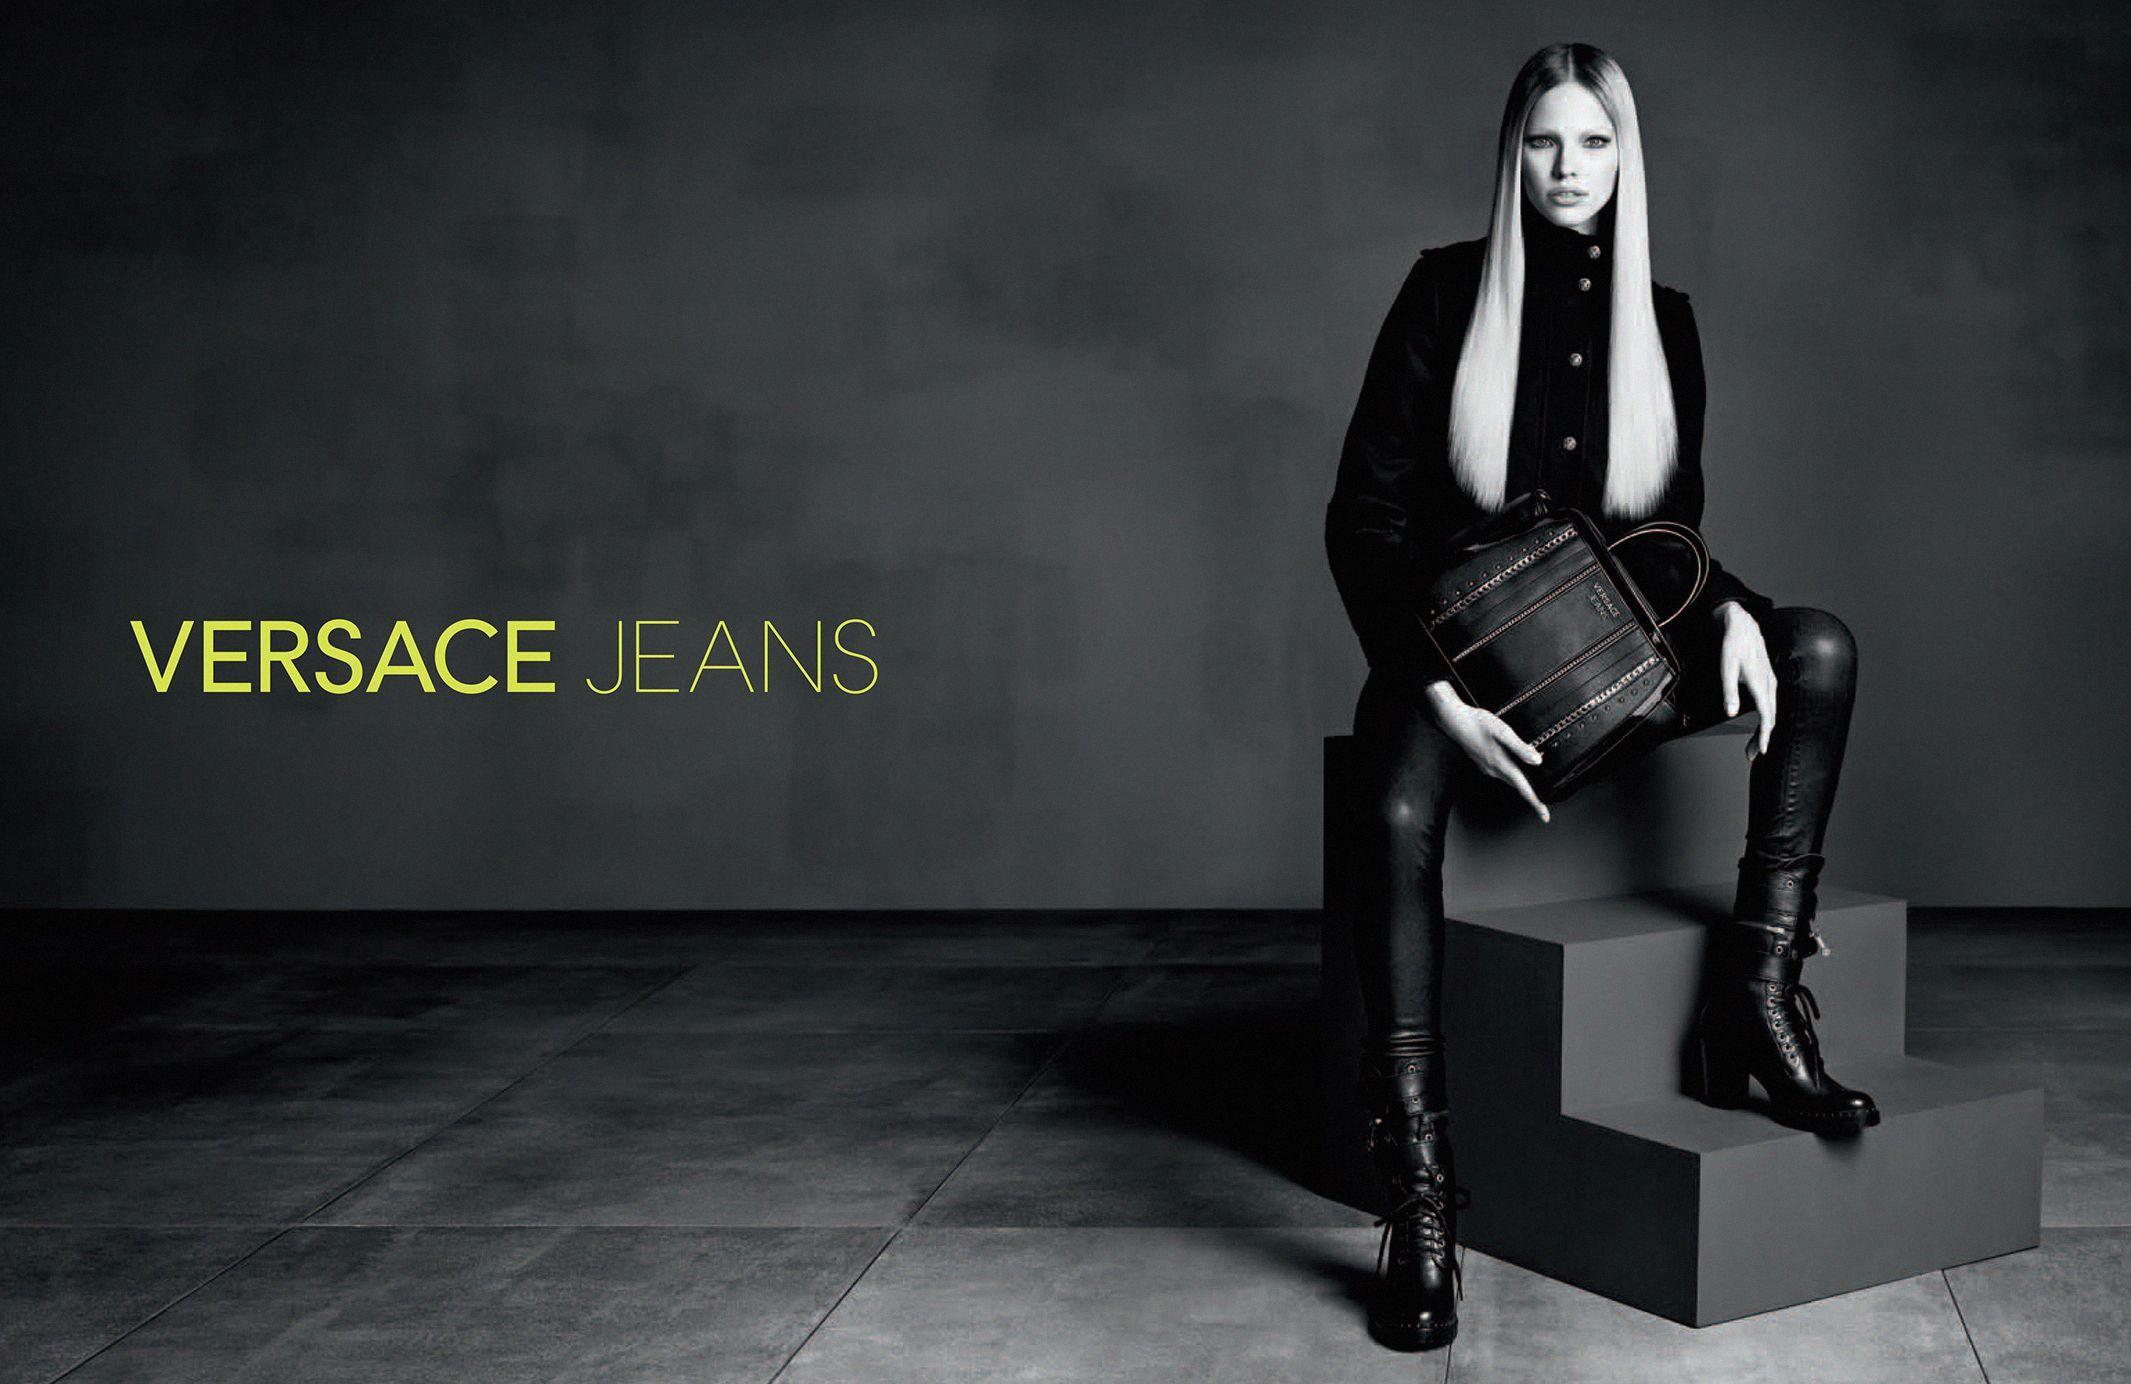 Girl in jeans by Versace wallpapers and image